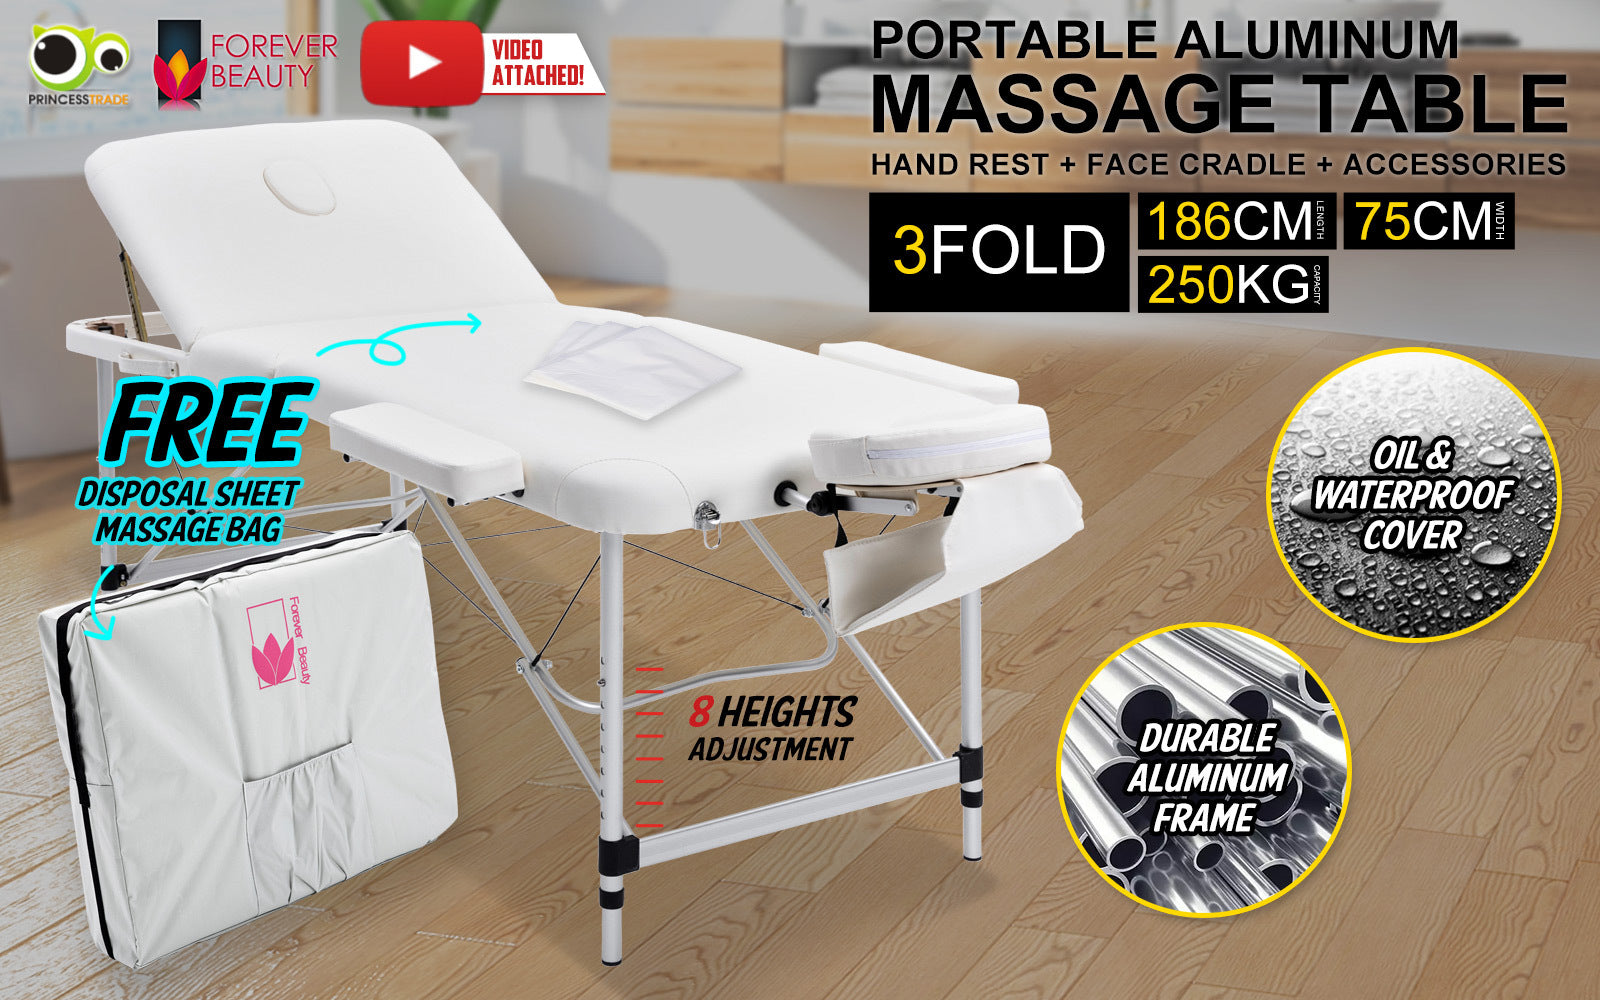 Forever Beauty White Portable Beauty Massage Table Bed Therapy Waxing 3 Fold 75cm Aluminium Deals499